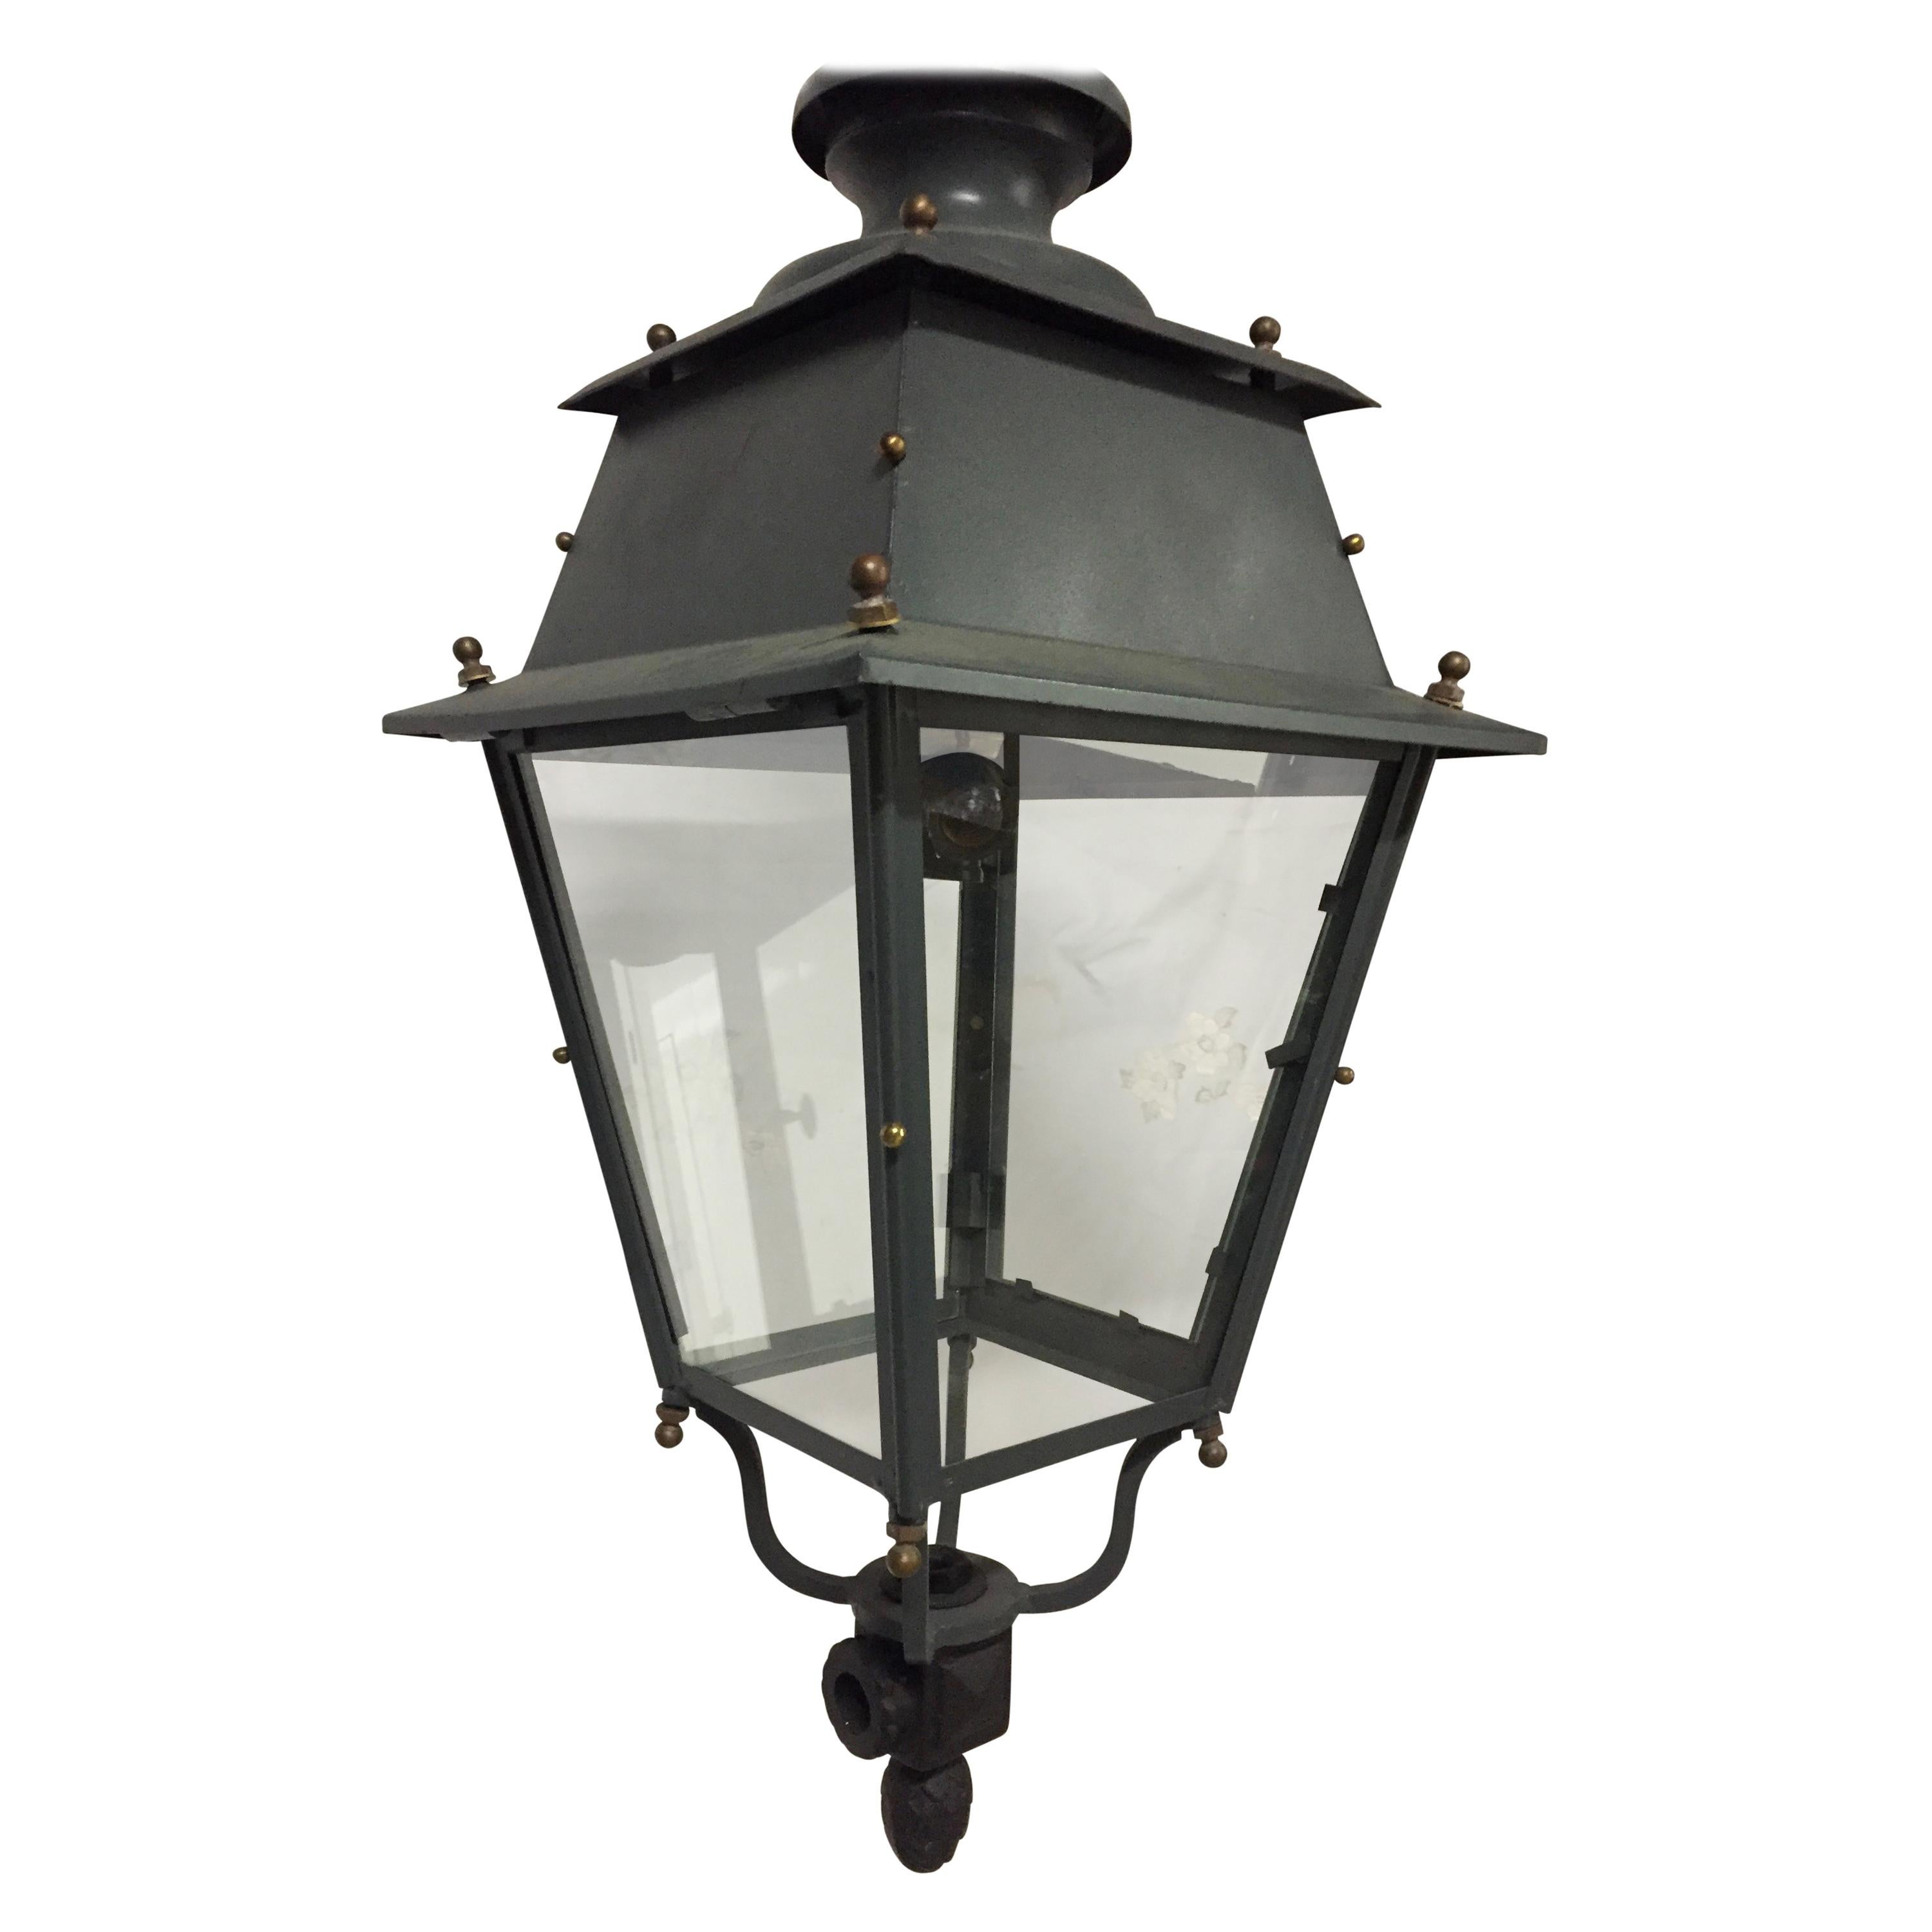 This beautiful early 20th century large Victorian style Parisian street lantern has been converted to be a gorgeous hanging light fixture. The painted iron lantern has bronze detail finials on all corners and decorating the edges. There are four